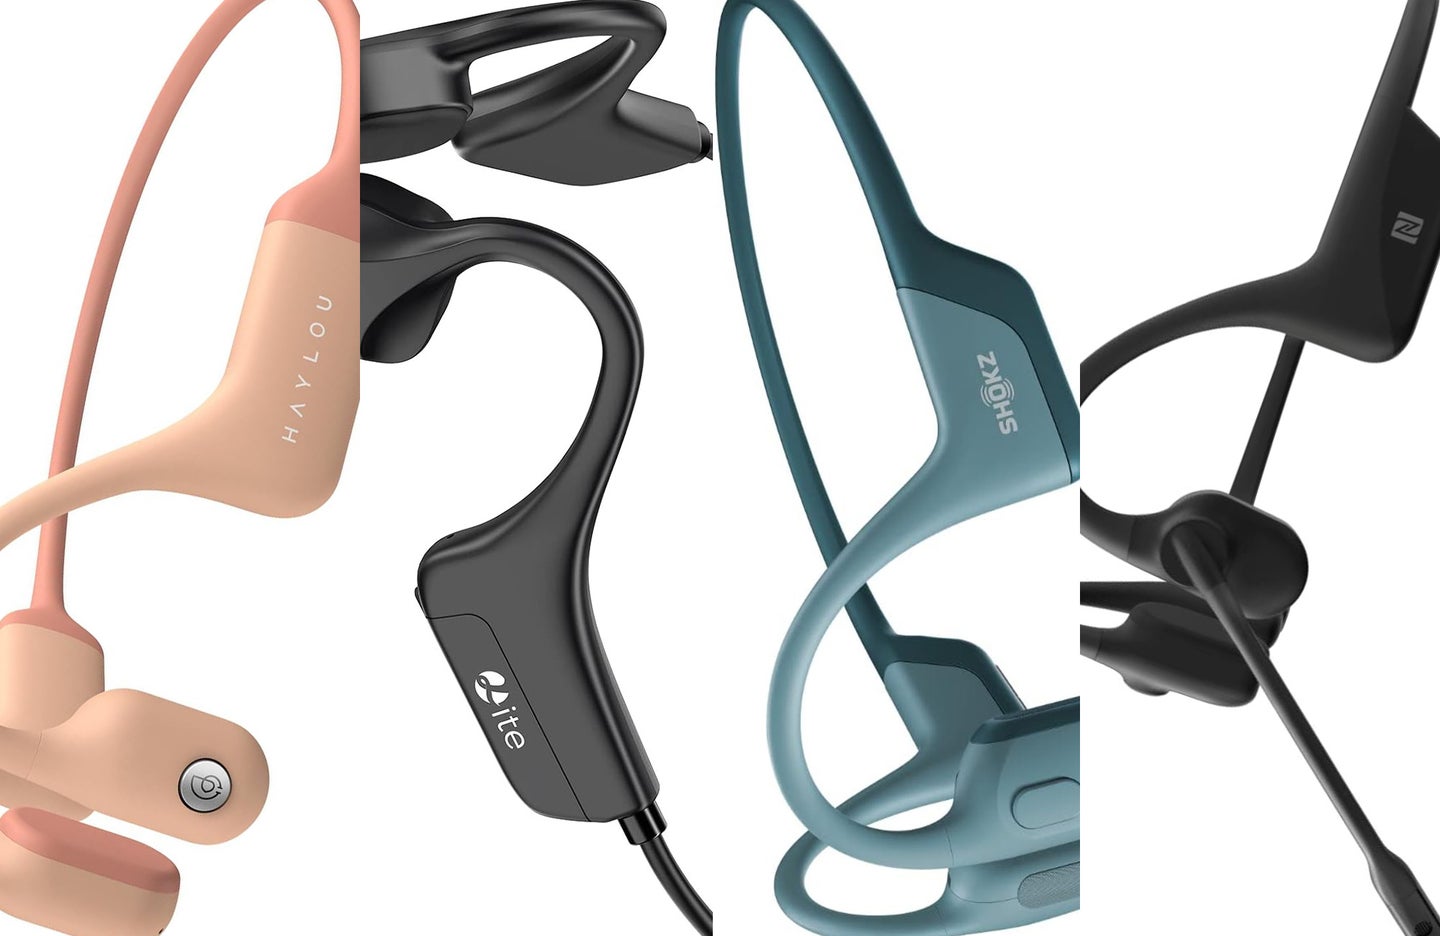 Four of the best bone-conduction headphones are sliced together against a white background.